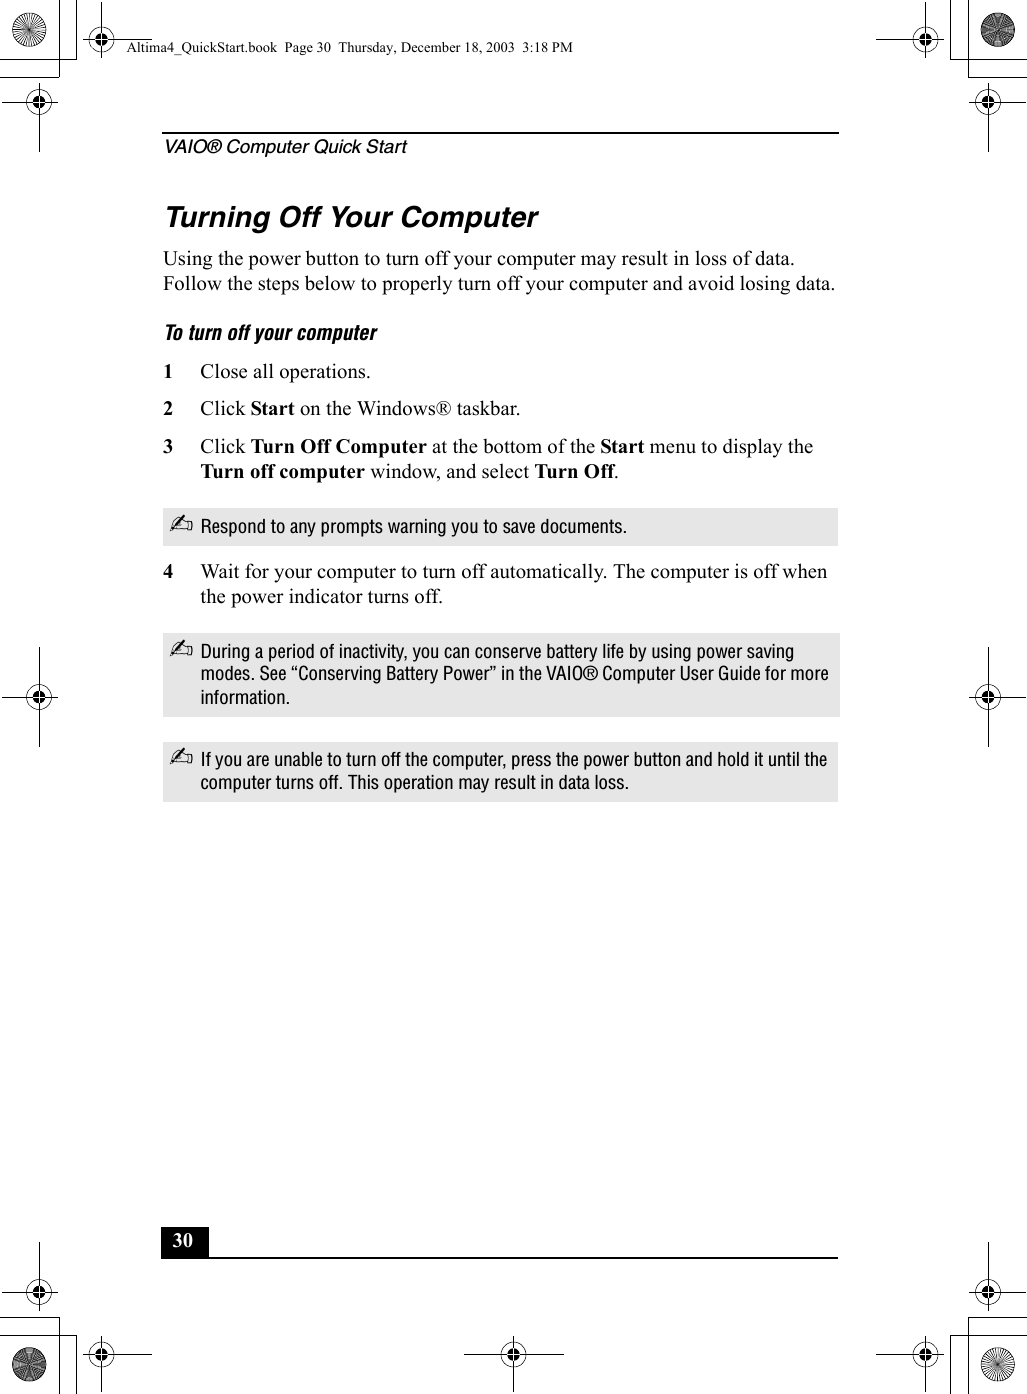 VAIO® Computer Quick Start30Turning Off Your ComputerUsing the power button to turn off your computer may result in loss of data. Follow the steps below to properly turn off your computer and avoid losing data.To turn off your computer1Close all operations.2Click Start on the Windows® taskbar.3Click Turn Off Computer at the bottom of the Start menu to display the Turn off computer window, and select Tur n O ff .4Wait for your computer to turn off automatically. The computer is off when the power indicator turns off.✍Respond to any prompts warning you to save documents.✍During a period of inactivity, you can conserve battery life by using power saving modes. See “Conserving Battery Power” in the VAIO® Computer User Guide for more information.✍If you are unable to turn off the computer, press the power button and hold it until the computer turns off. This operation may result in data loss.Altima4_QuickStart.book  Page 30  Thursday, December 18, 2003  3:18 PM